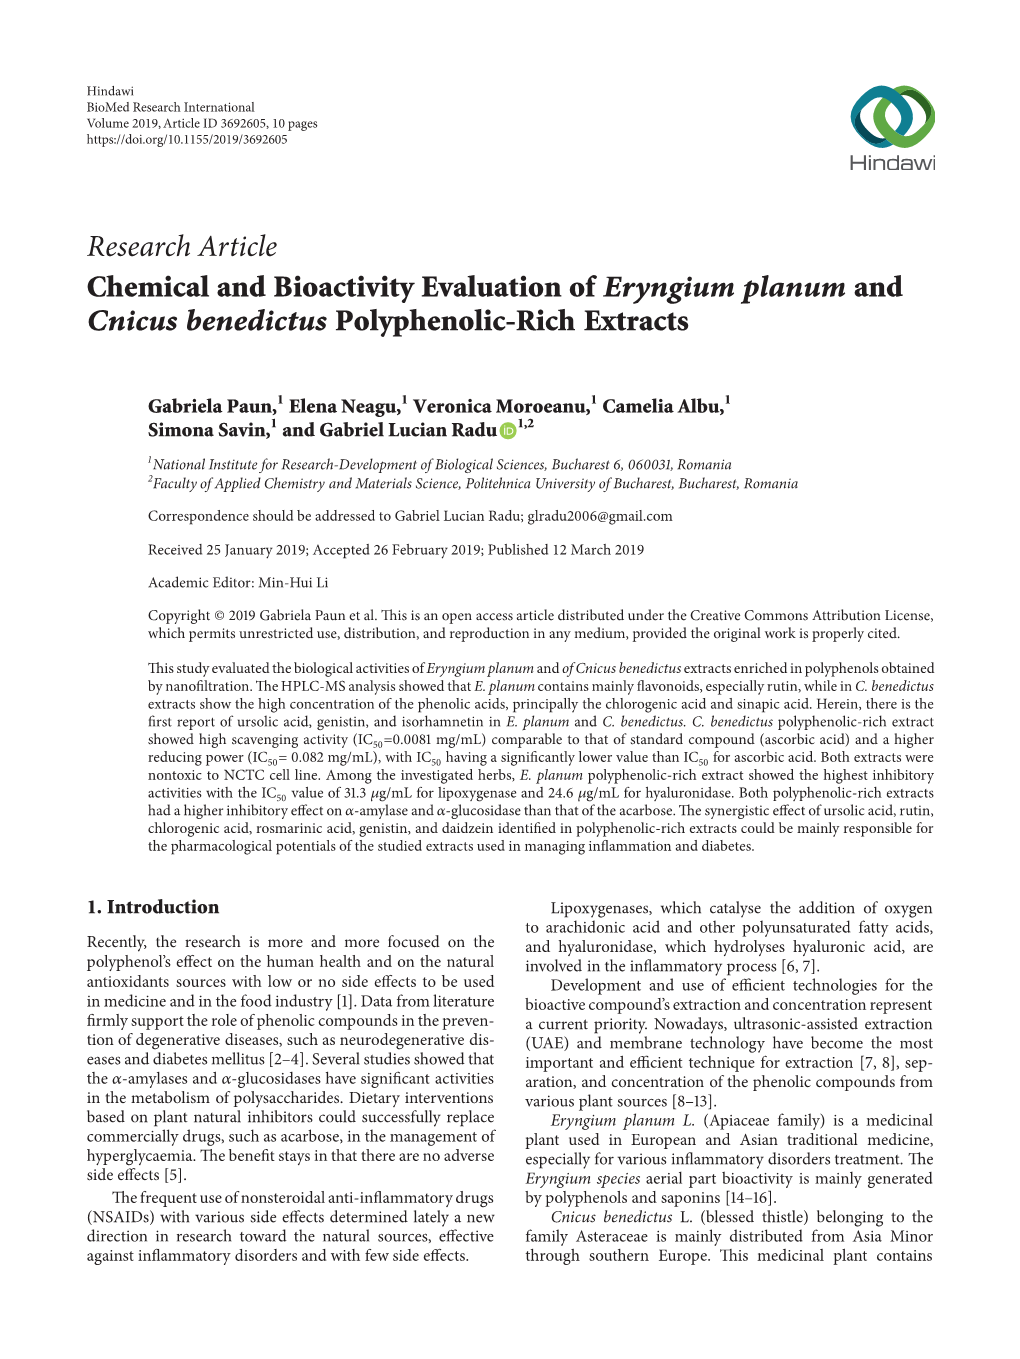 Research Article Chemical and Bioactivity Evaluation of Eryngium Planum and Cnicus Benedictus Polyphenolic-Rich Extracts